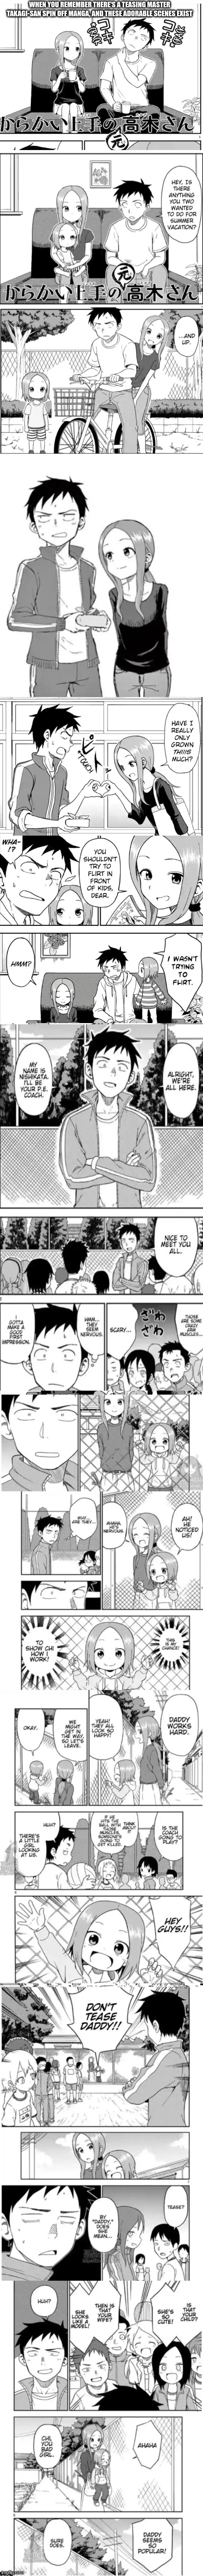 the teasing master takagi-san spin off is so cute | WHEN YOU REMEMBER THERE'S A TEASING MASTER TAKAGI-SAN SPIN OFF MANGA, AND THESE ADORABLE SCENES EXIST | image tagged in anime,manga,teasing master takagi-san,spin off | made w/ Imgflip meme maker